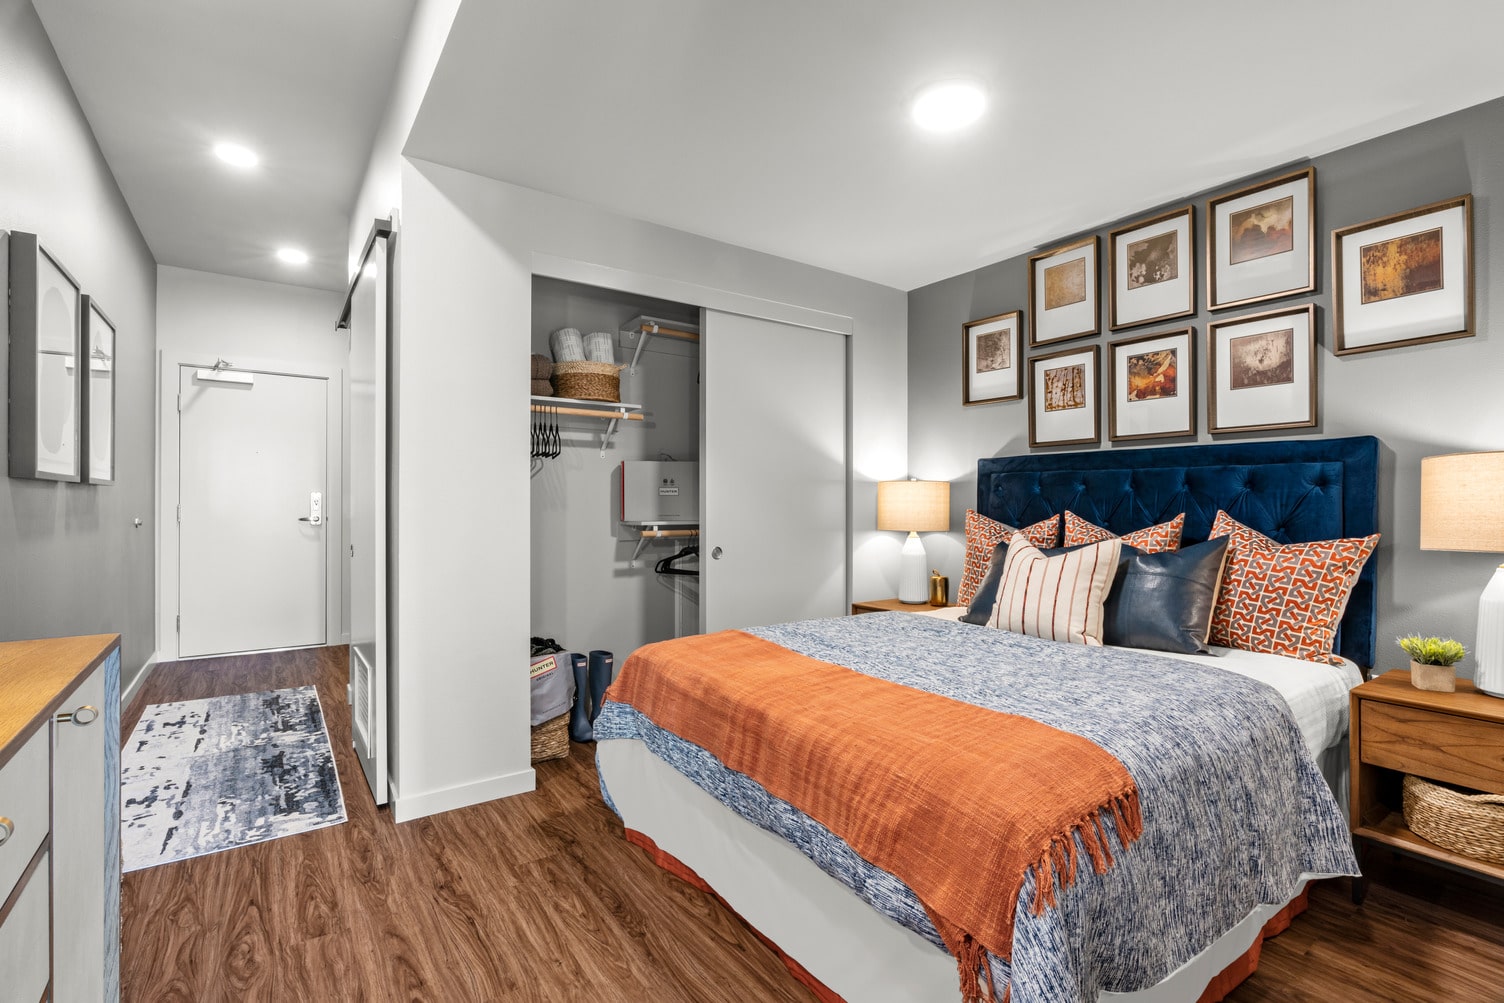 Furnished studio apartment bedroom area with wood flooring, sliding barn style door, and a closet.